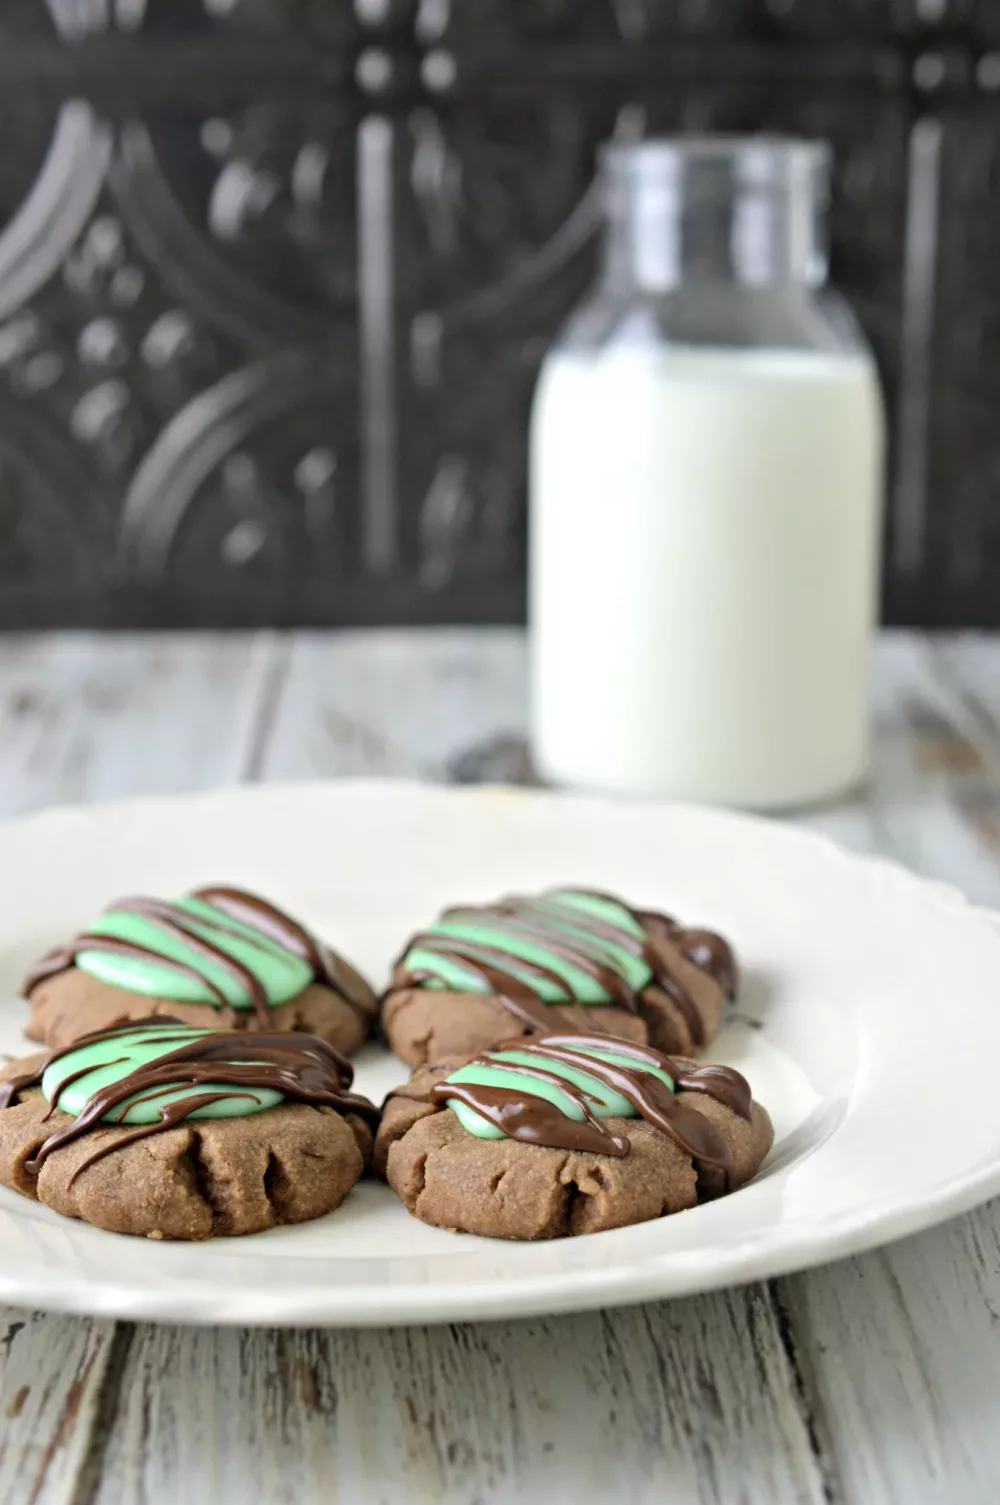 Chocolate cookies with a mint filling and chocolate drizzle with a glass of milk